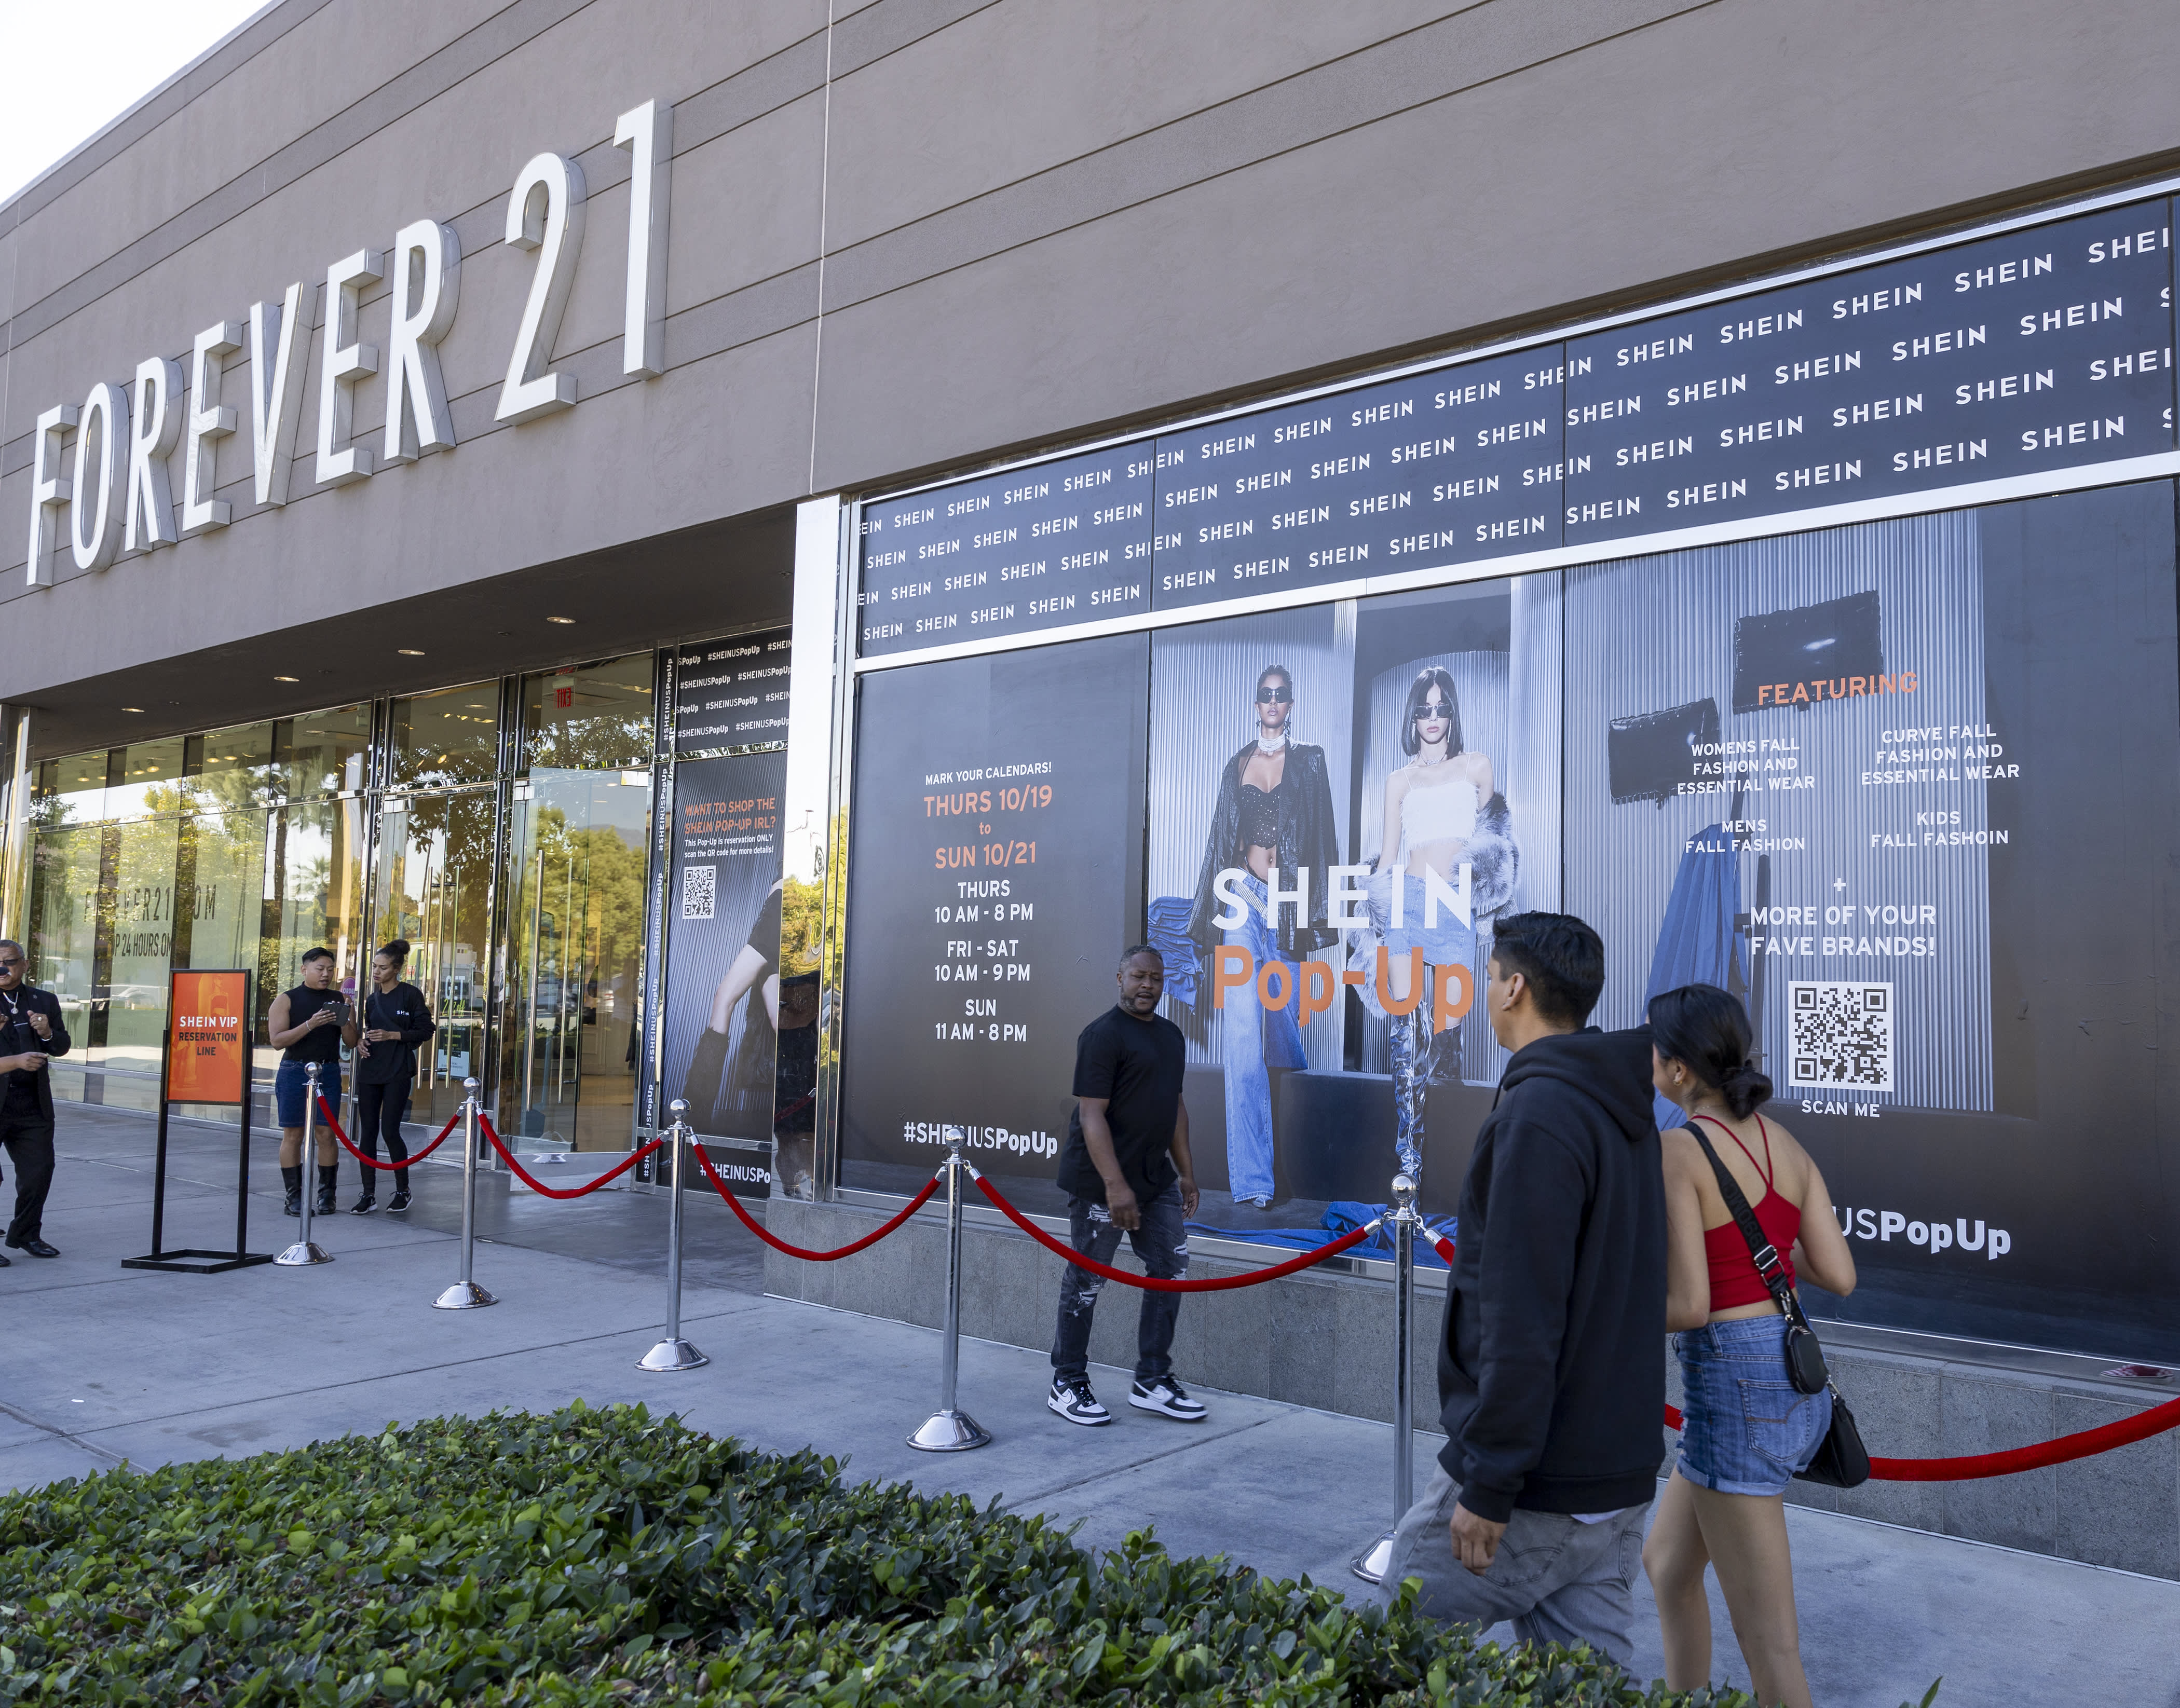 Shop Forever 21 for the latest trends and the best deals